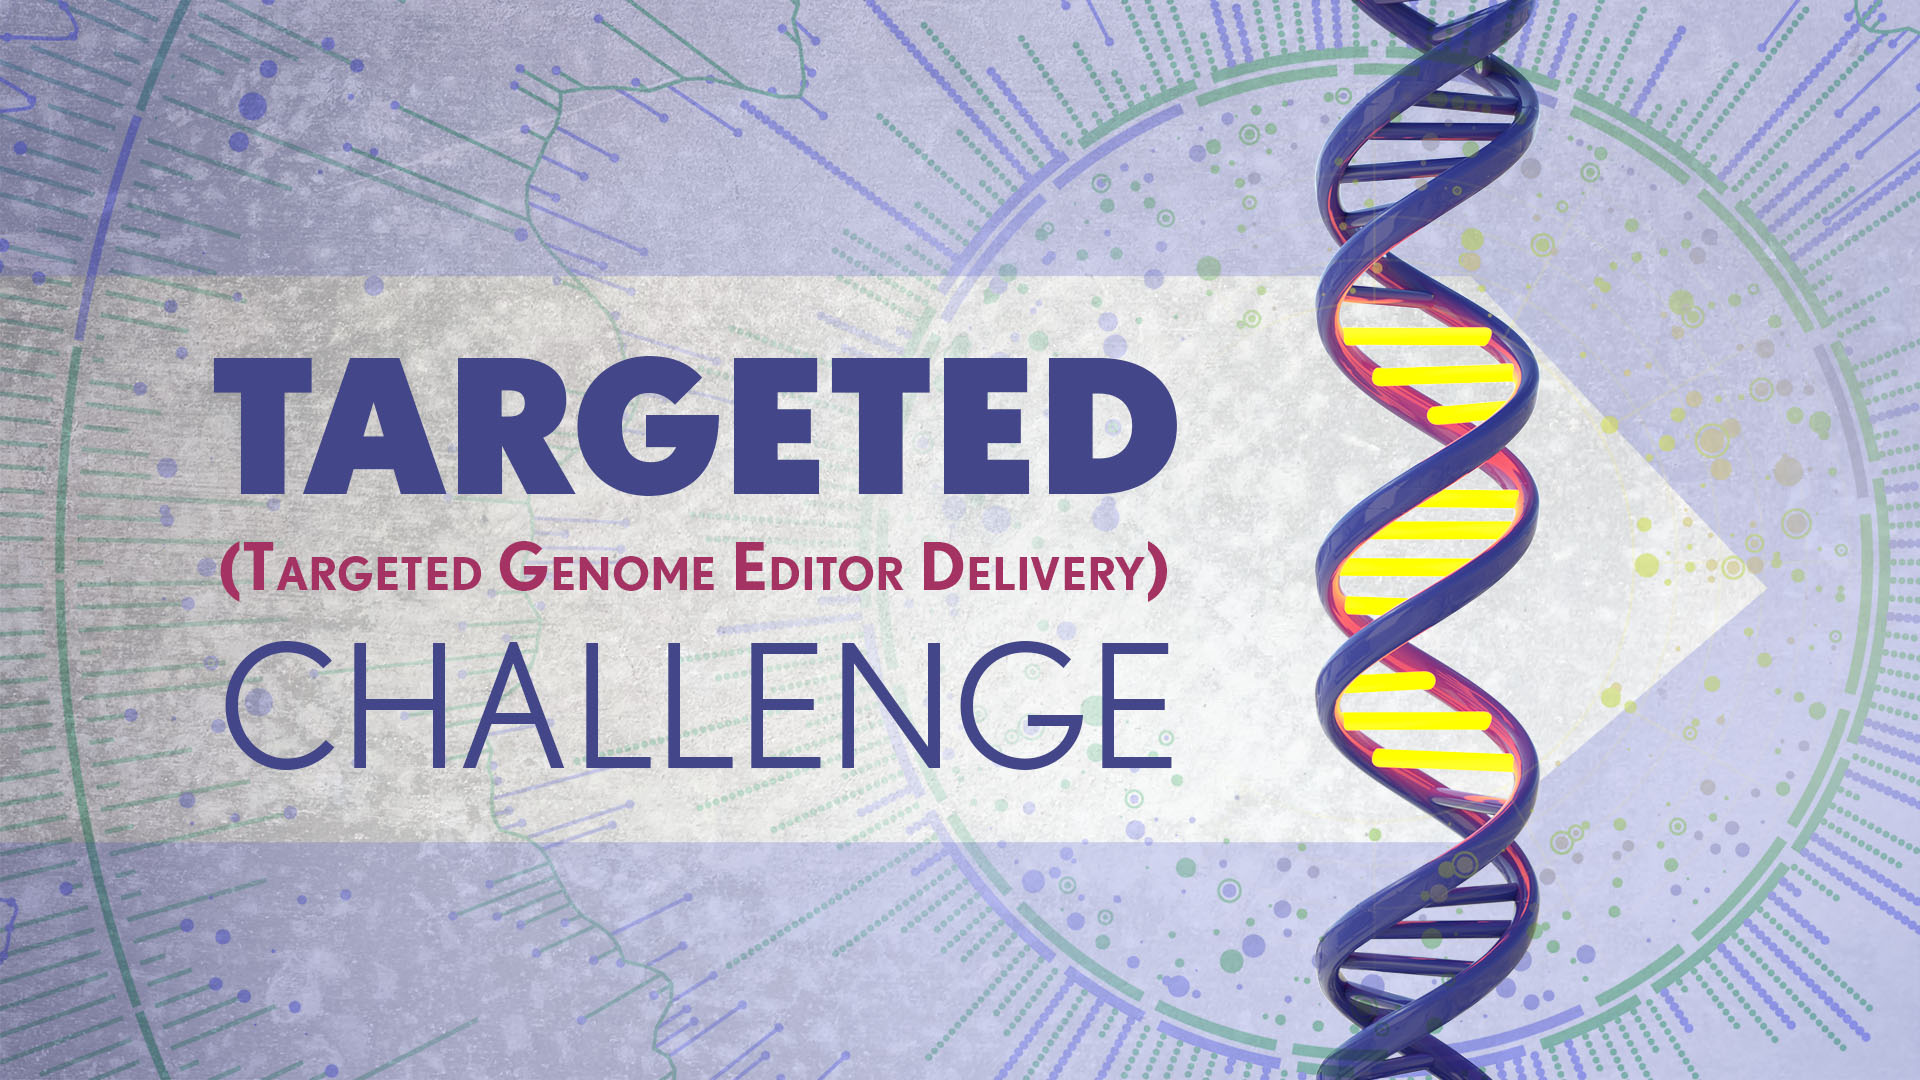 Targeted (Targeted Genome Editor Delivery) Challenge. A strand of DNA with a number of glowing base pairs being targeted with an arrow